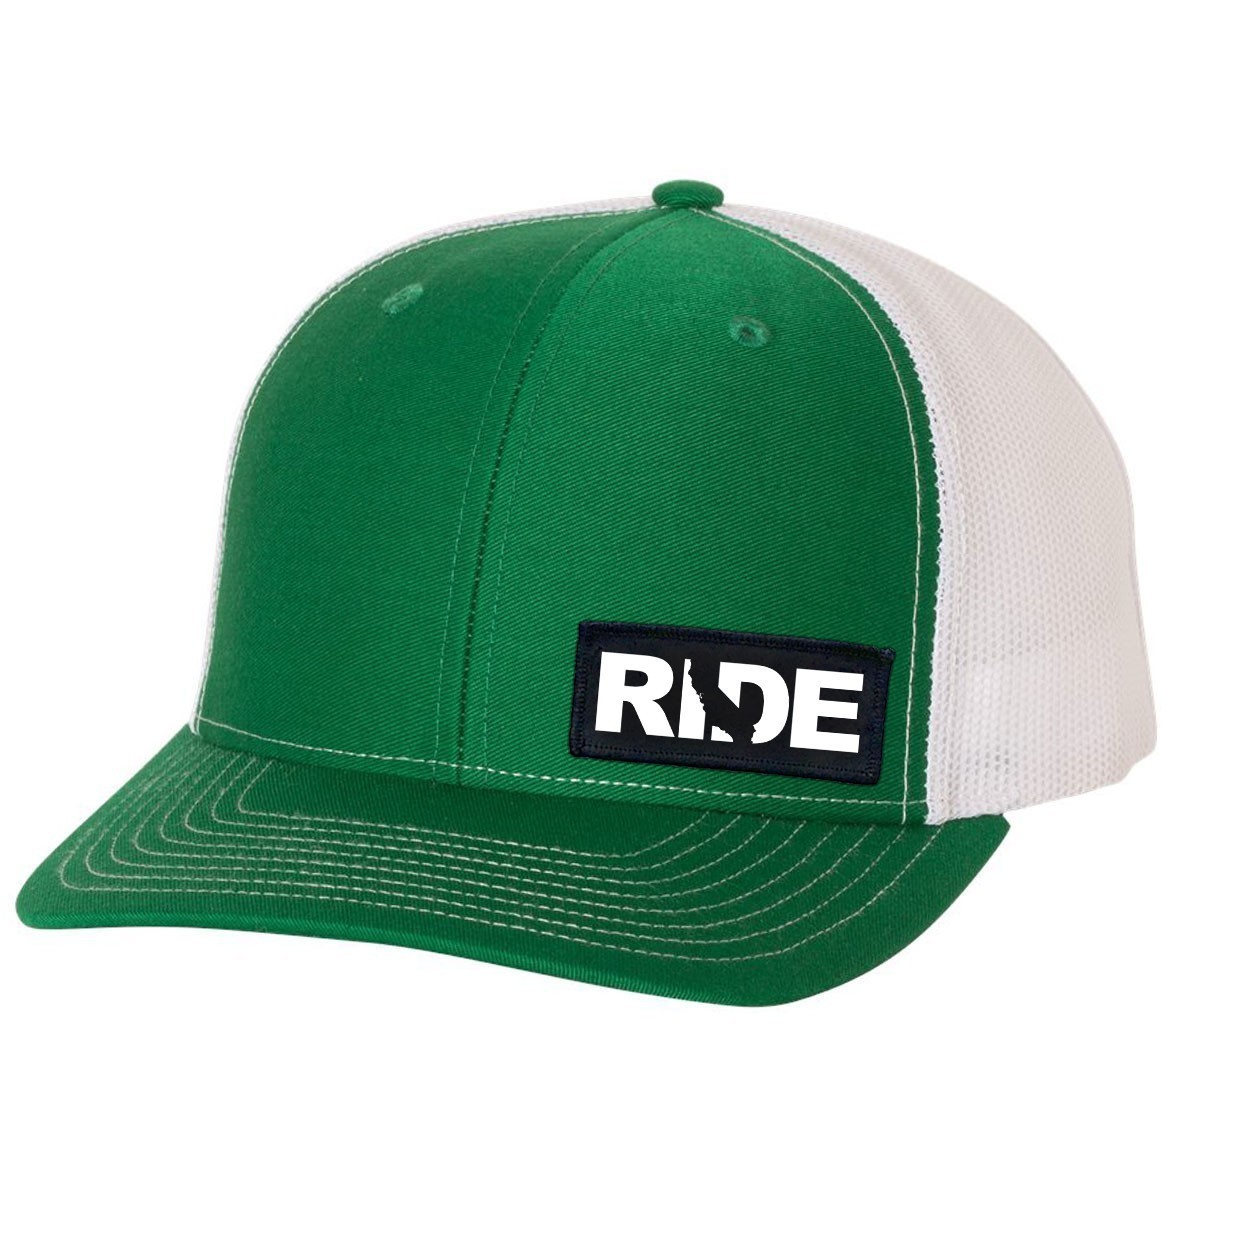 Ride California Night Out Woven Patch Snapback Trucker Hat Green/White (White Logo)